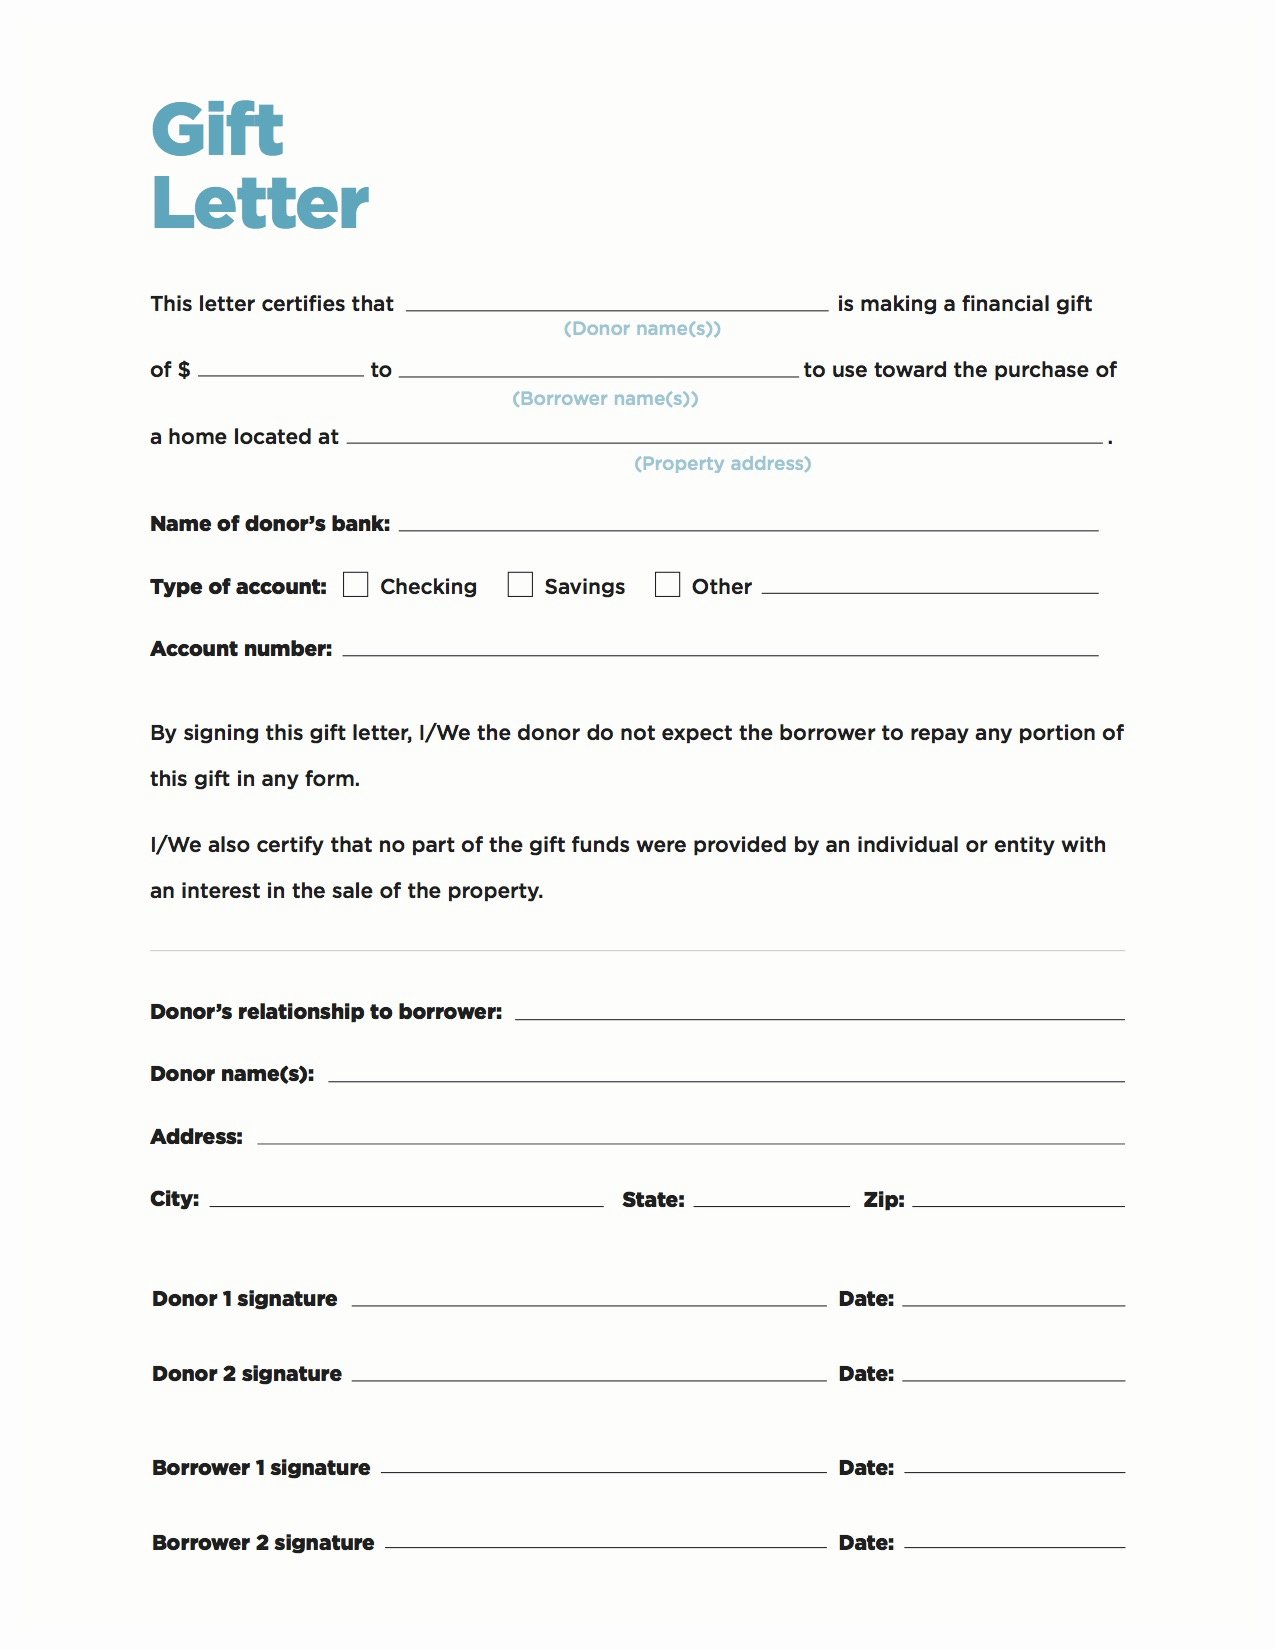 Mortgage Gift Letter Template Best Of Gift Money Can Meet Your Down Payment Needs Nerdwallet